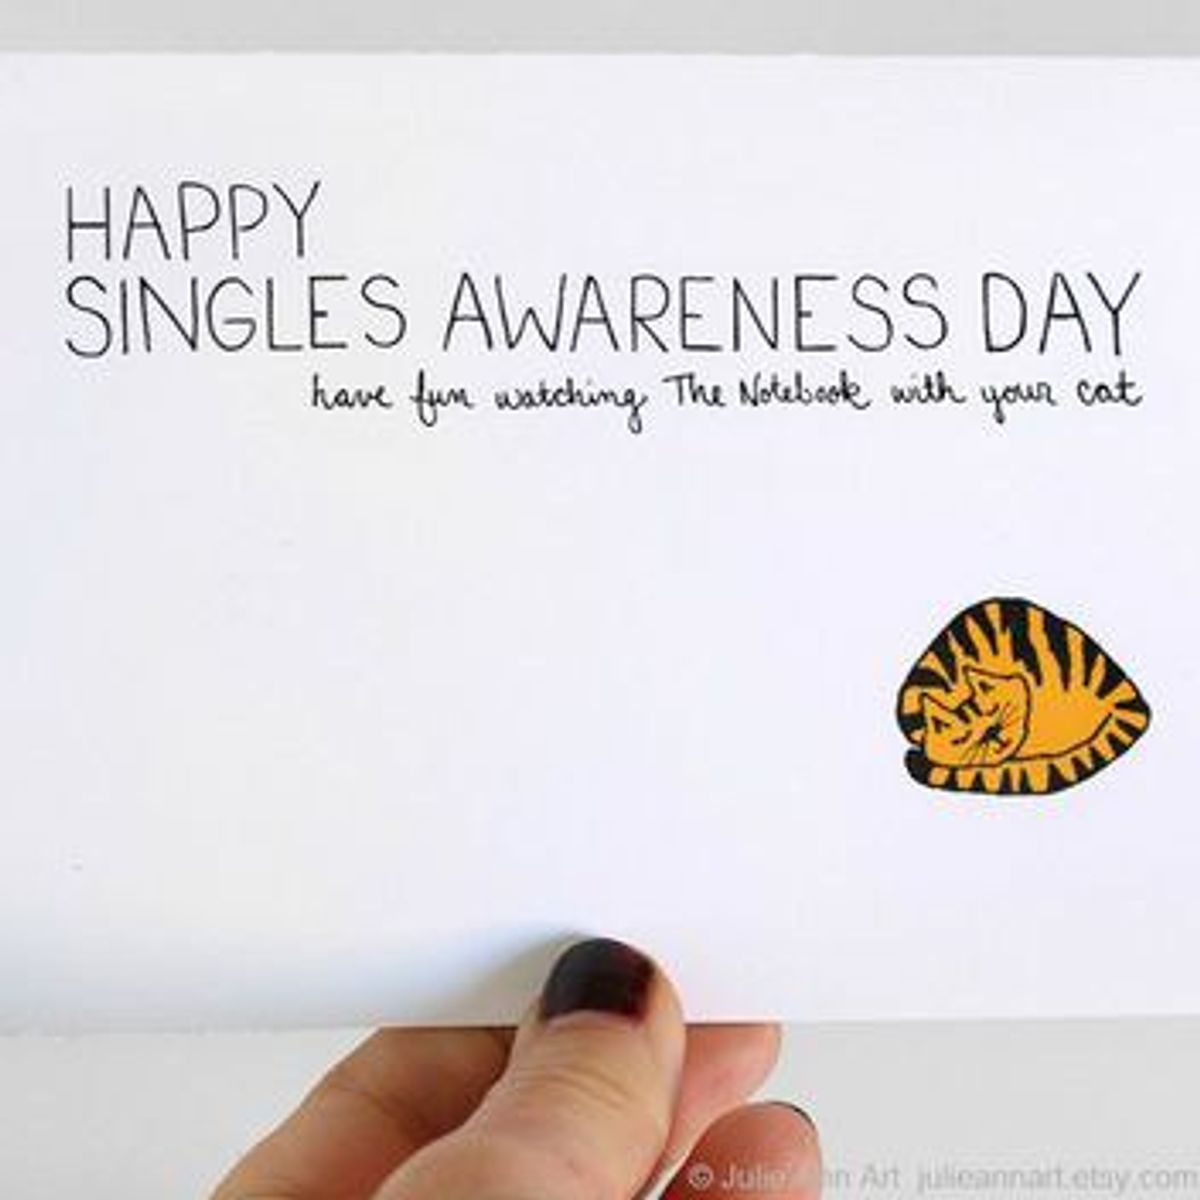 Taking The SAD Out Of Singles Awareness Day